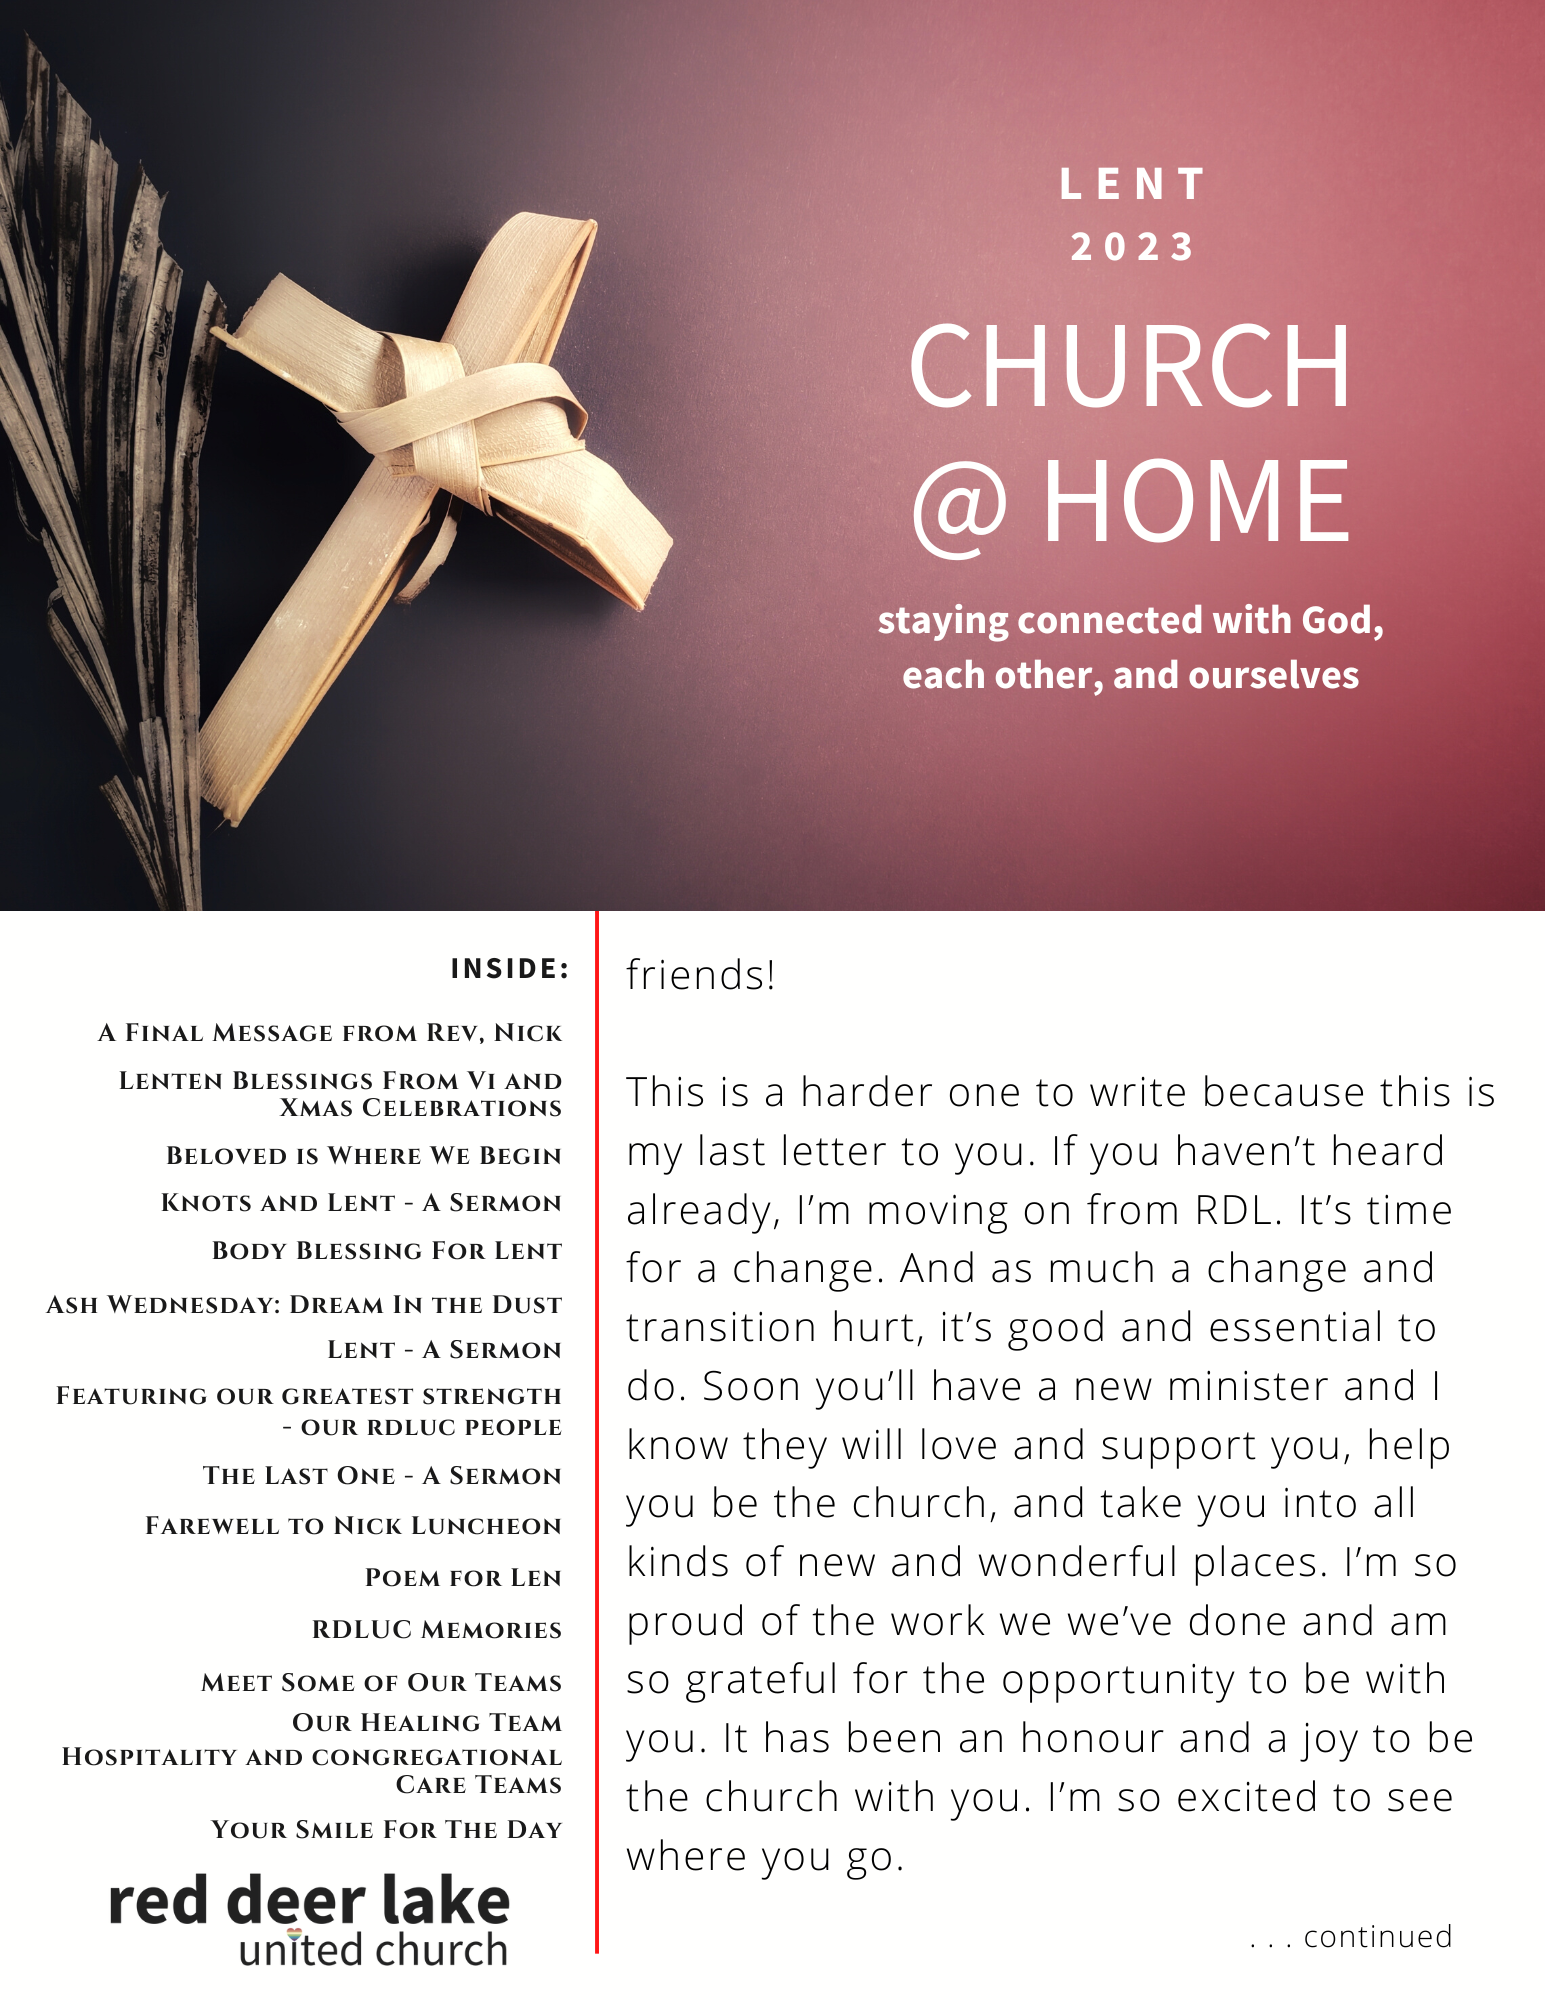 Church @ Home Lent 2023.png